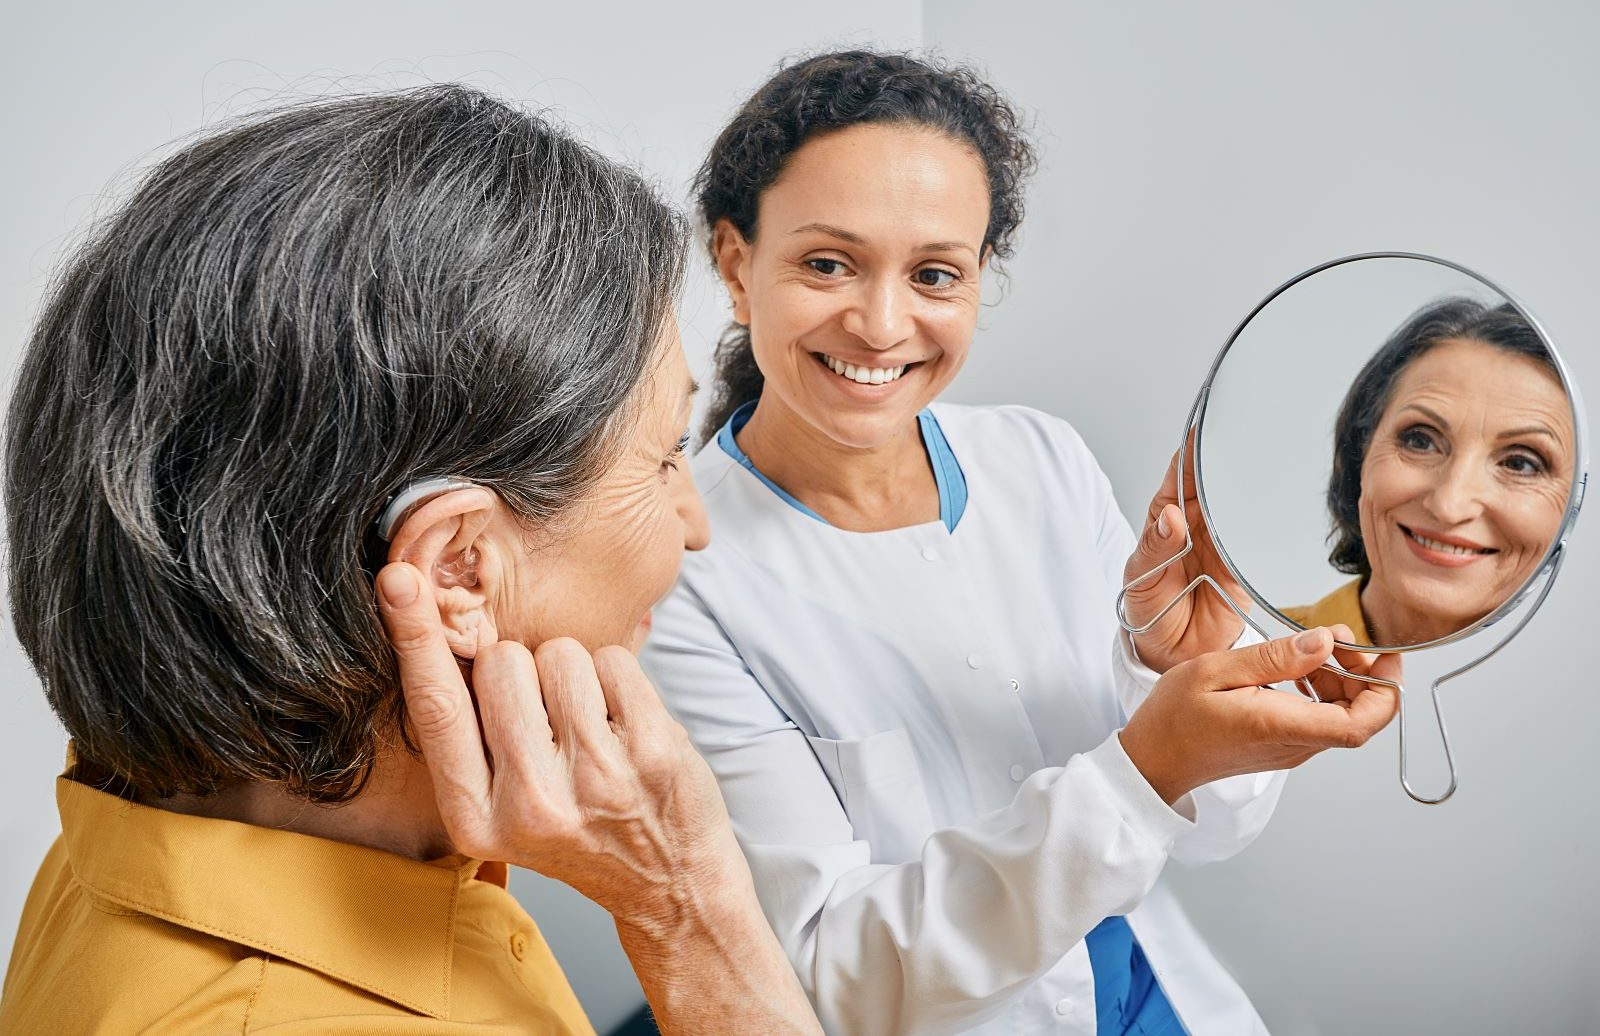 Ready to Buy Hearing Aids? Why Your First Step Should be an Evaluation with an Audiologist